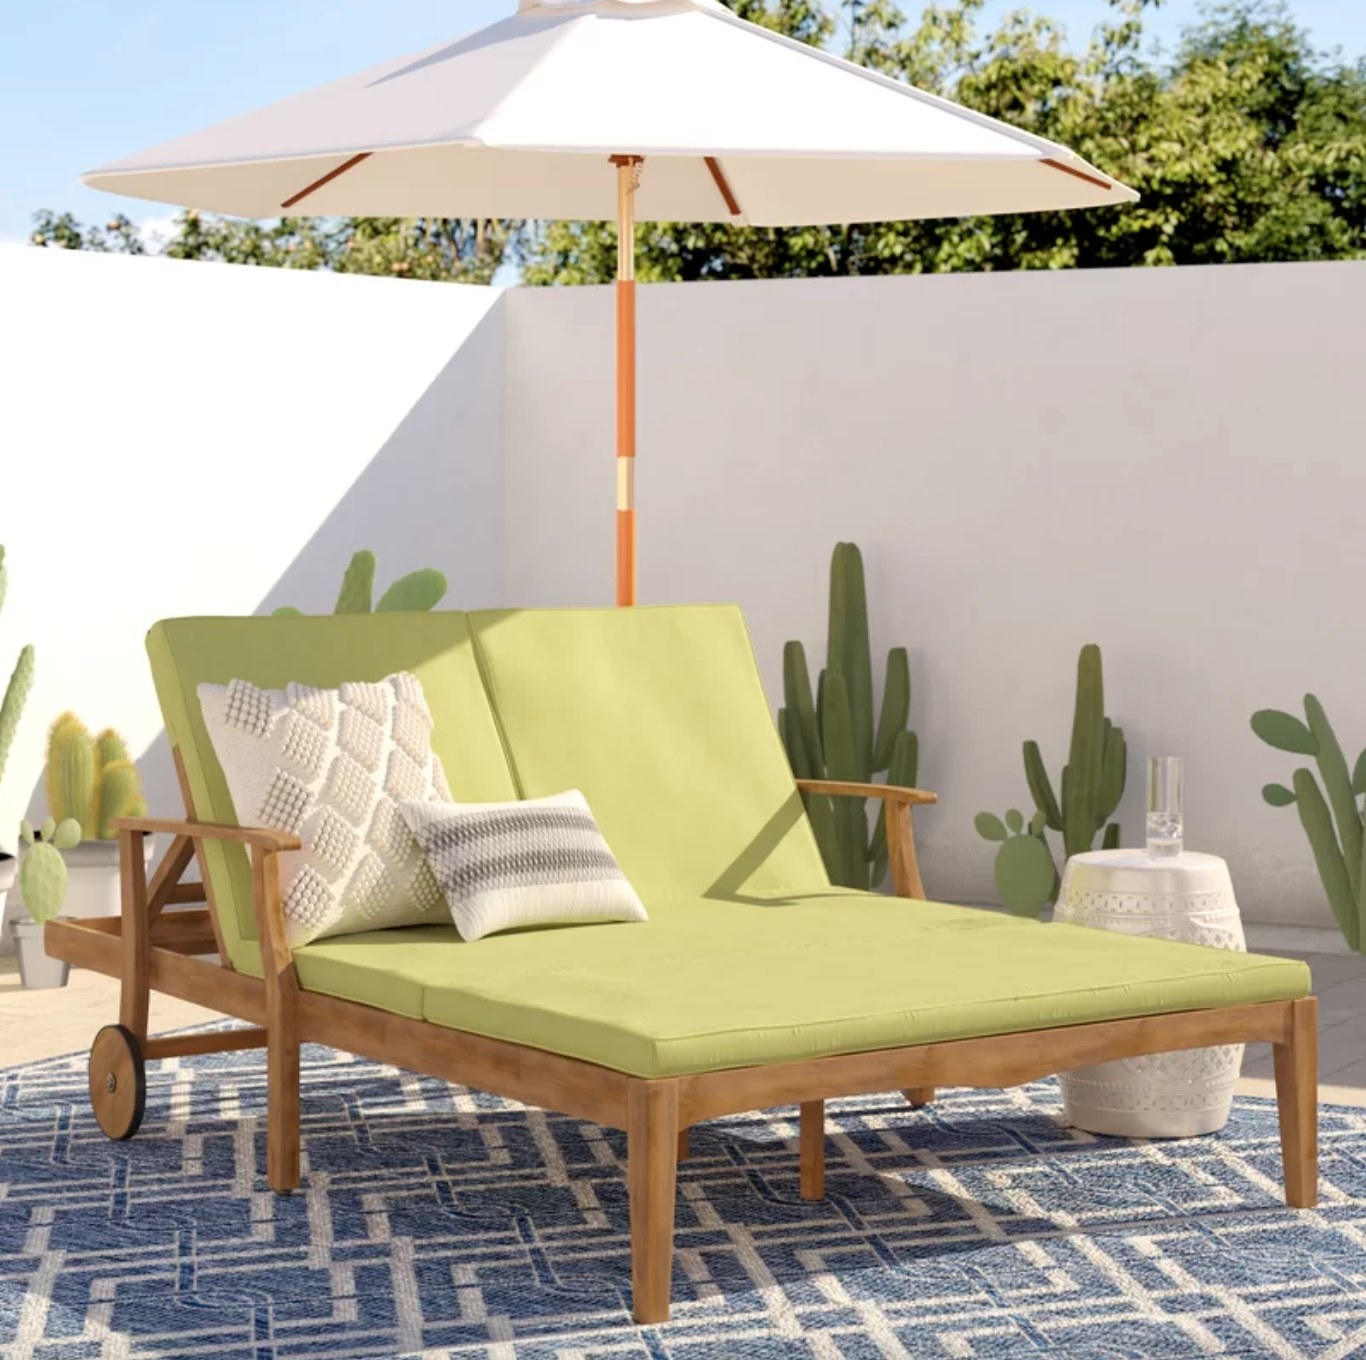 the light wood double chaise with a green frame and decorative pillows in a decorated outdoor space